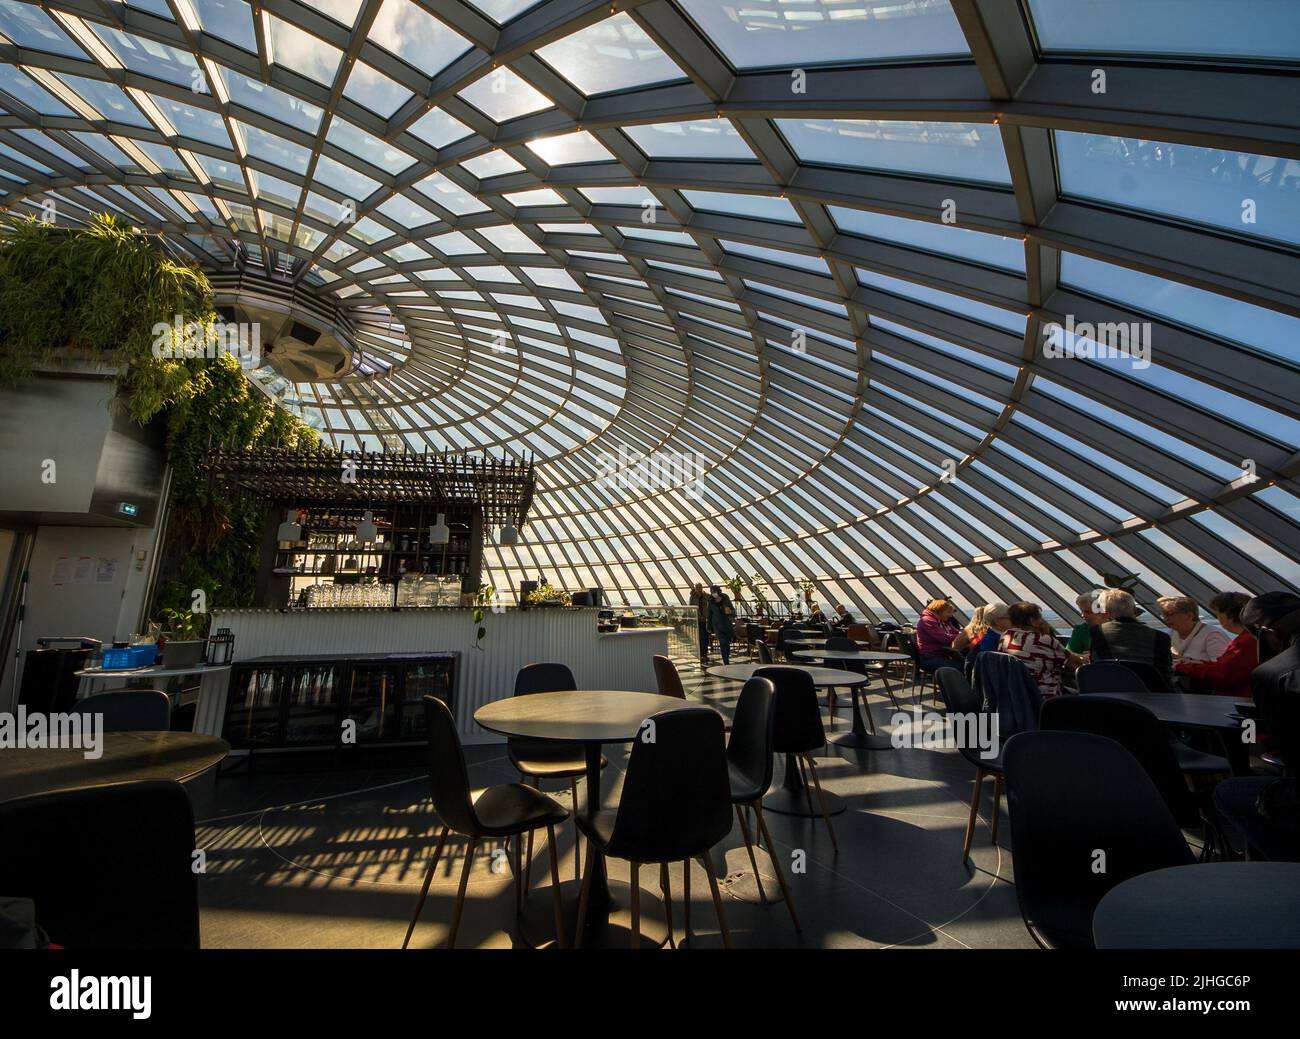 Reykjavik, Iceland - July 4, 2022 Interior landscape view of the restaurant and glass dome of Reykjavik's iconic landmark; the Perlan. Located on the Stock Photo